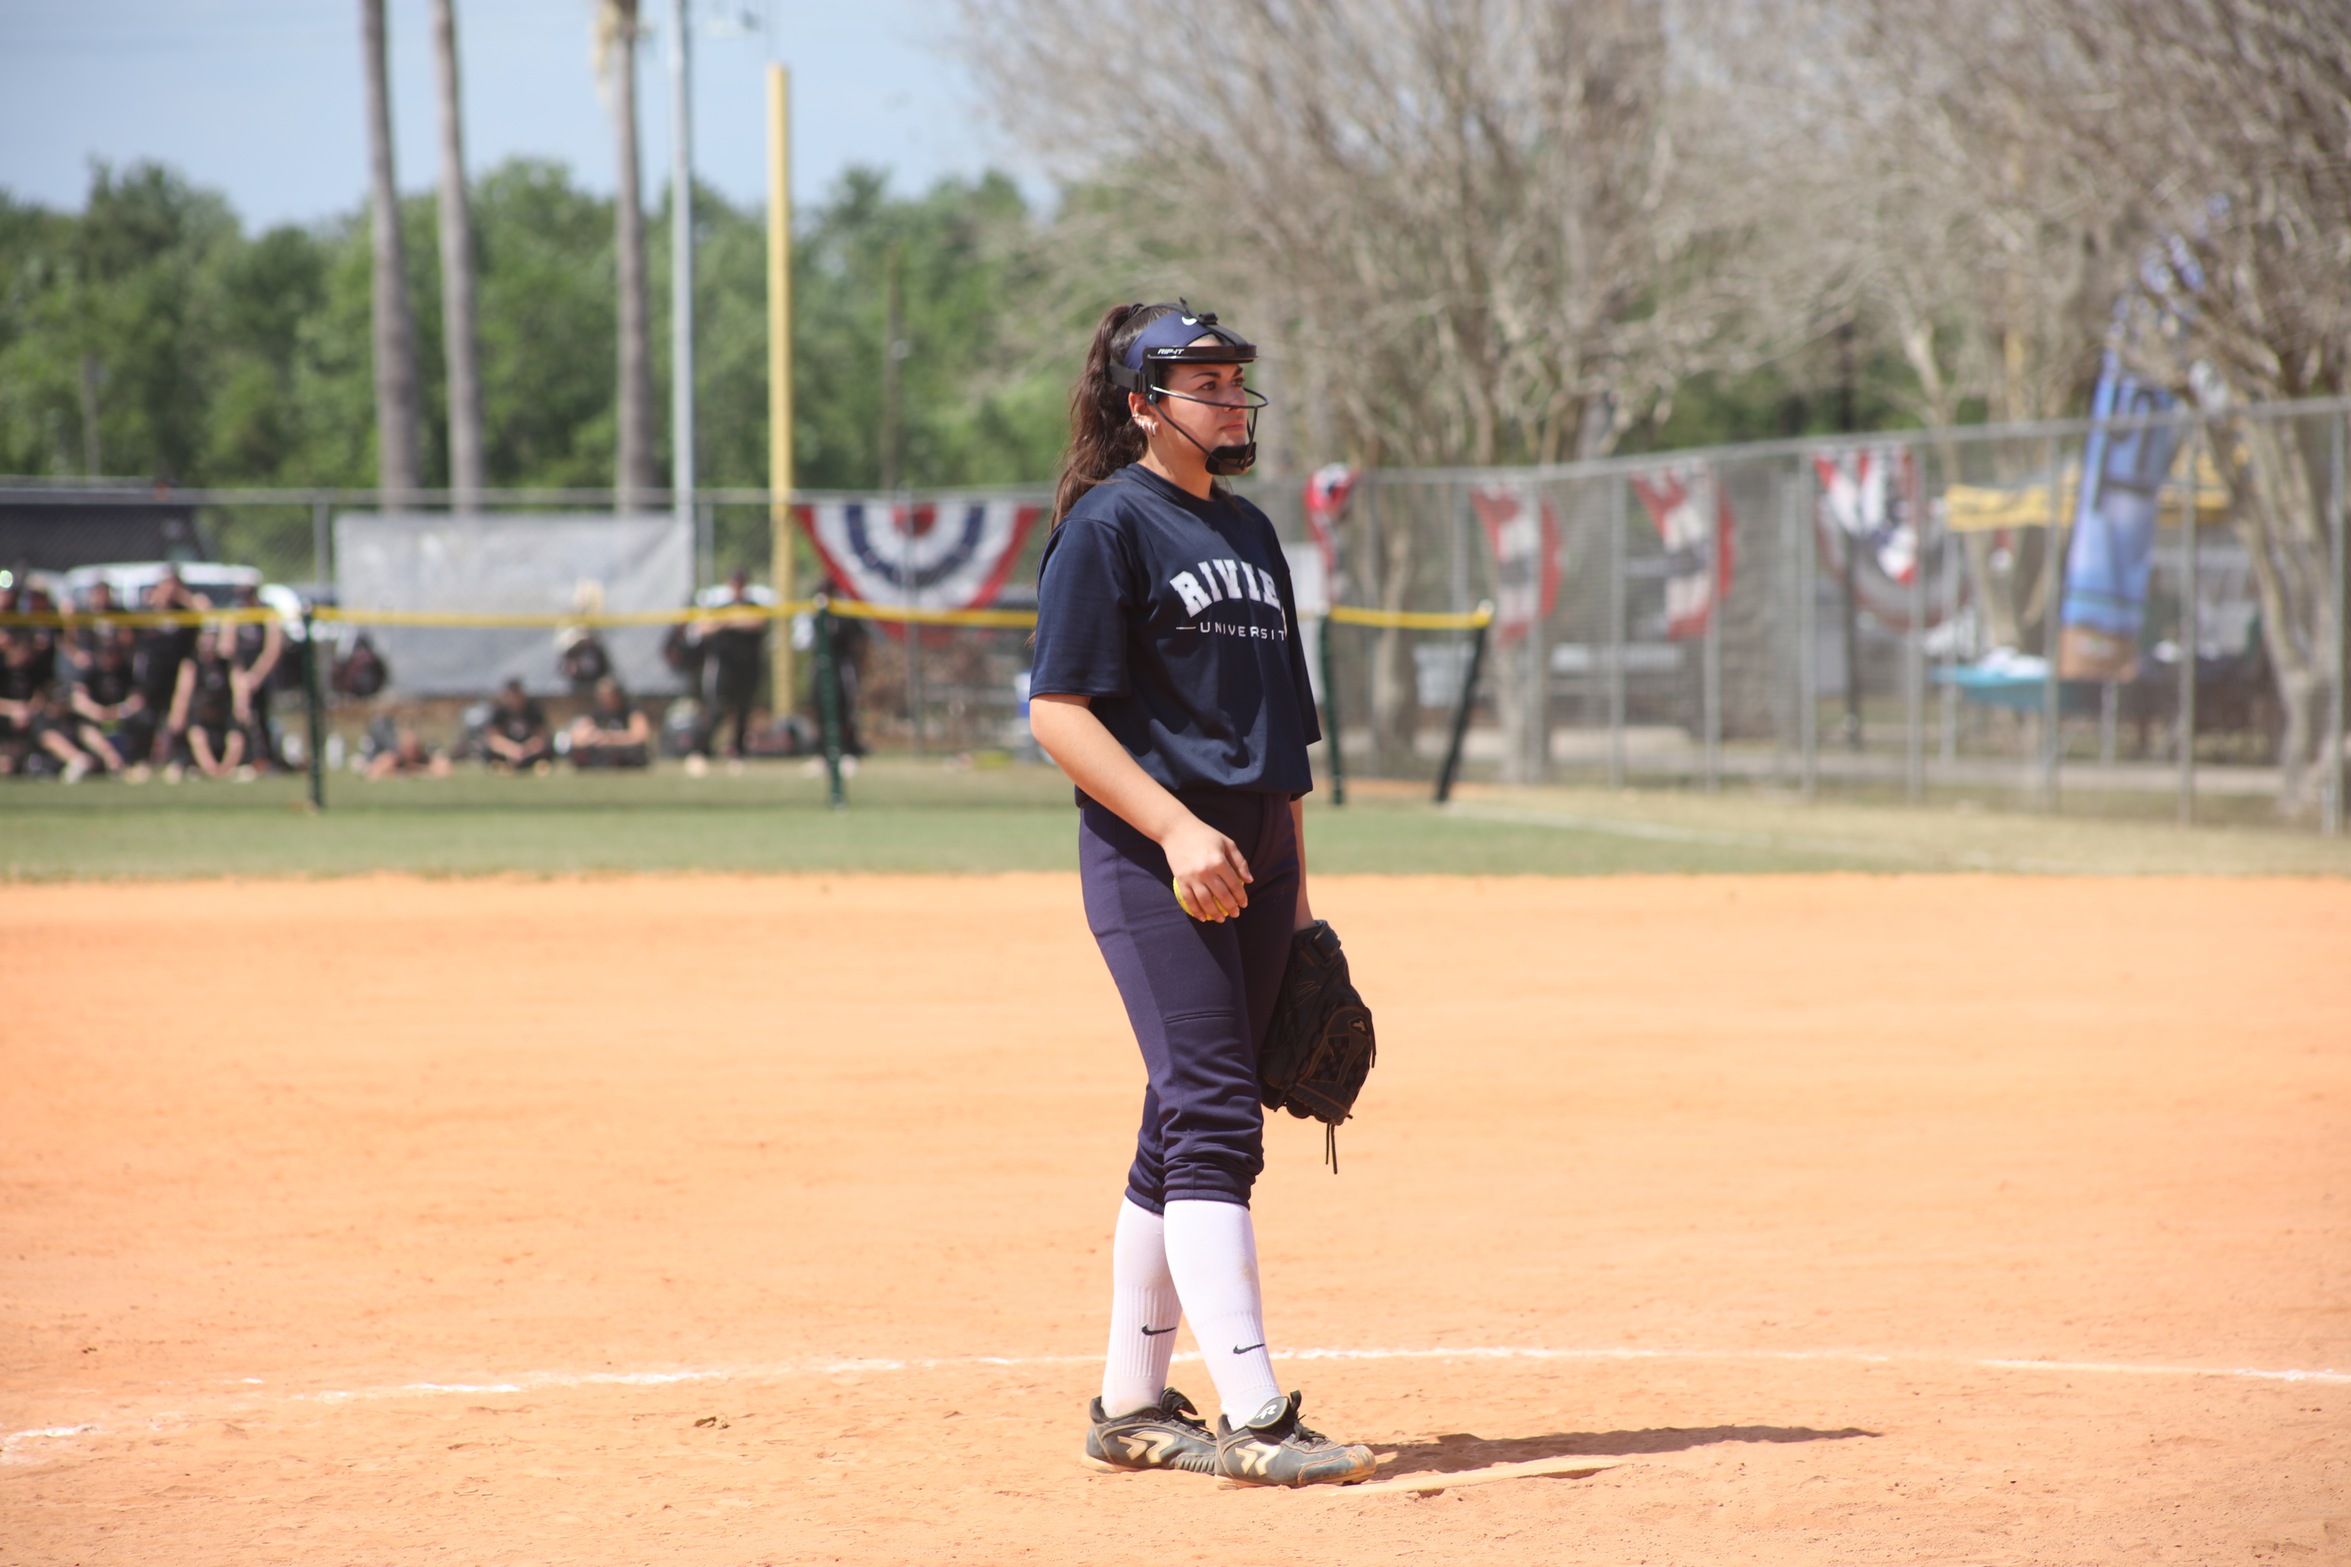 Softball Splits with Lasell